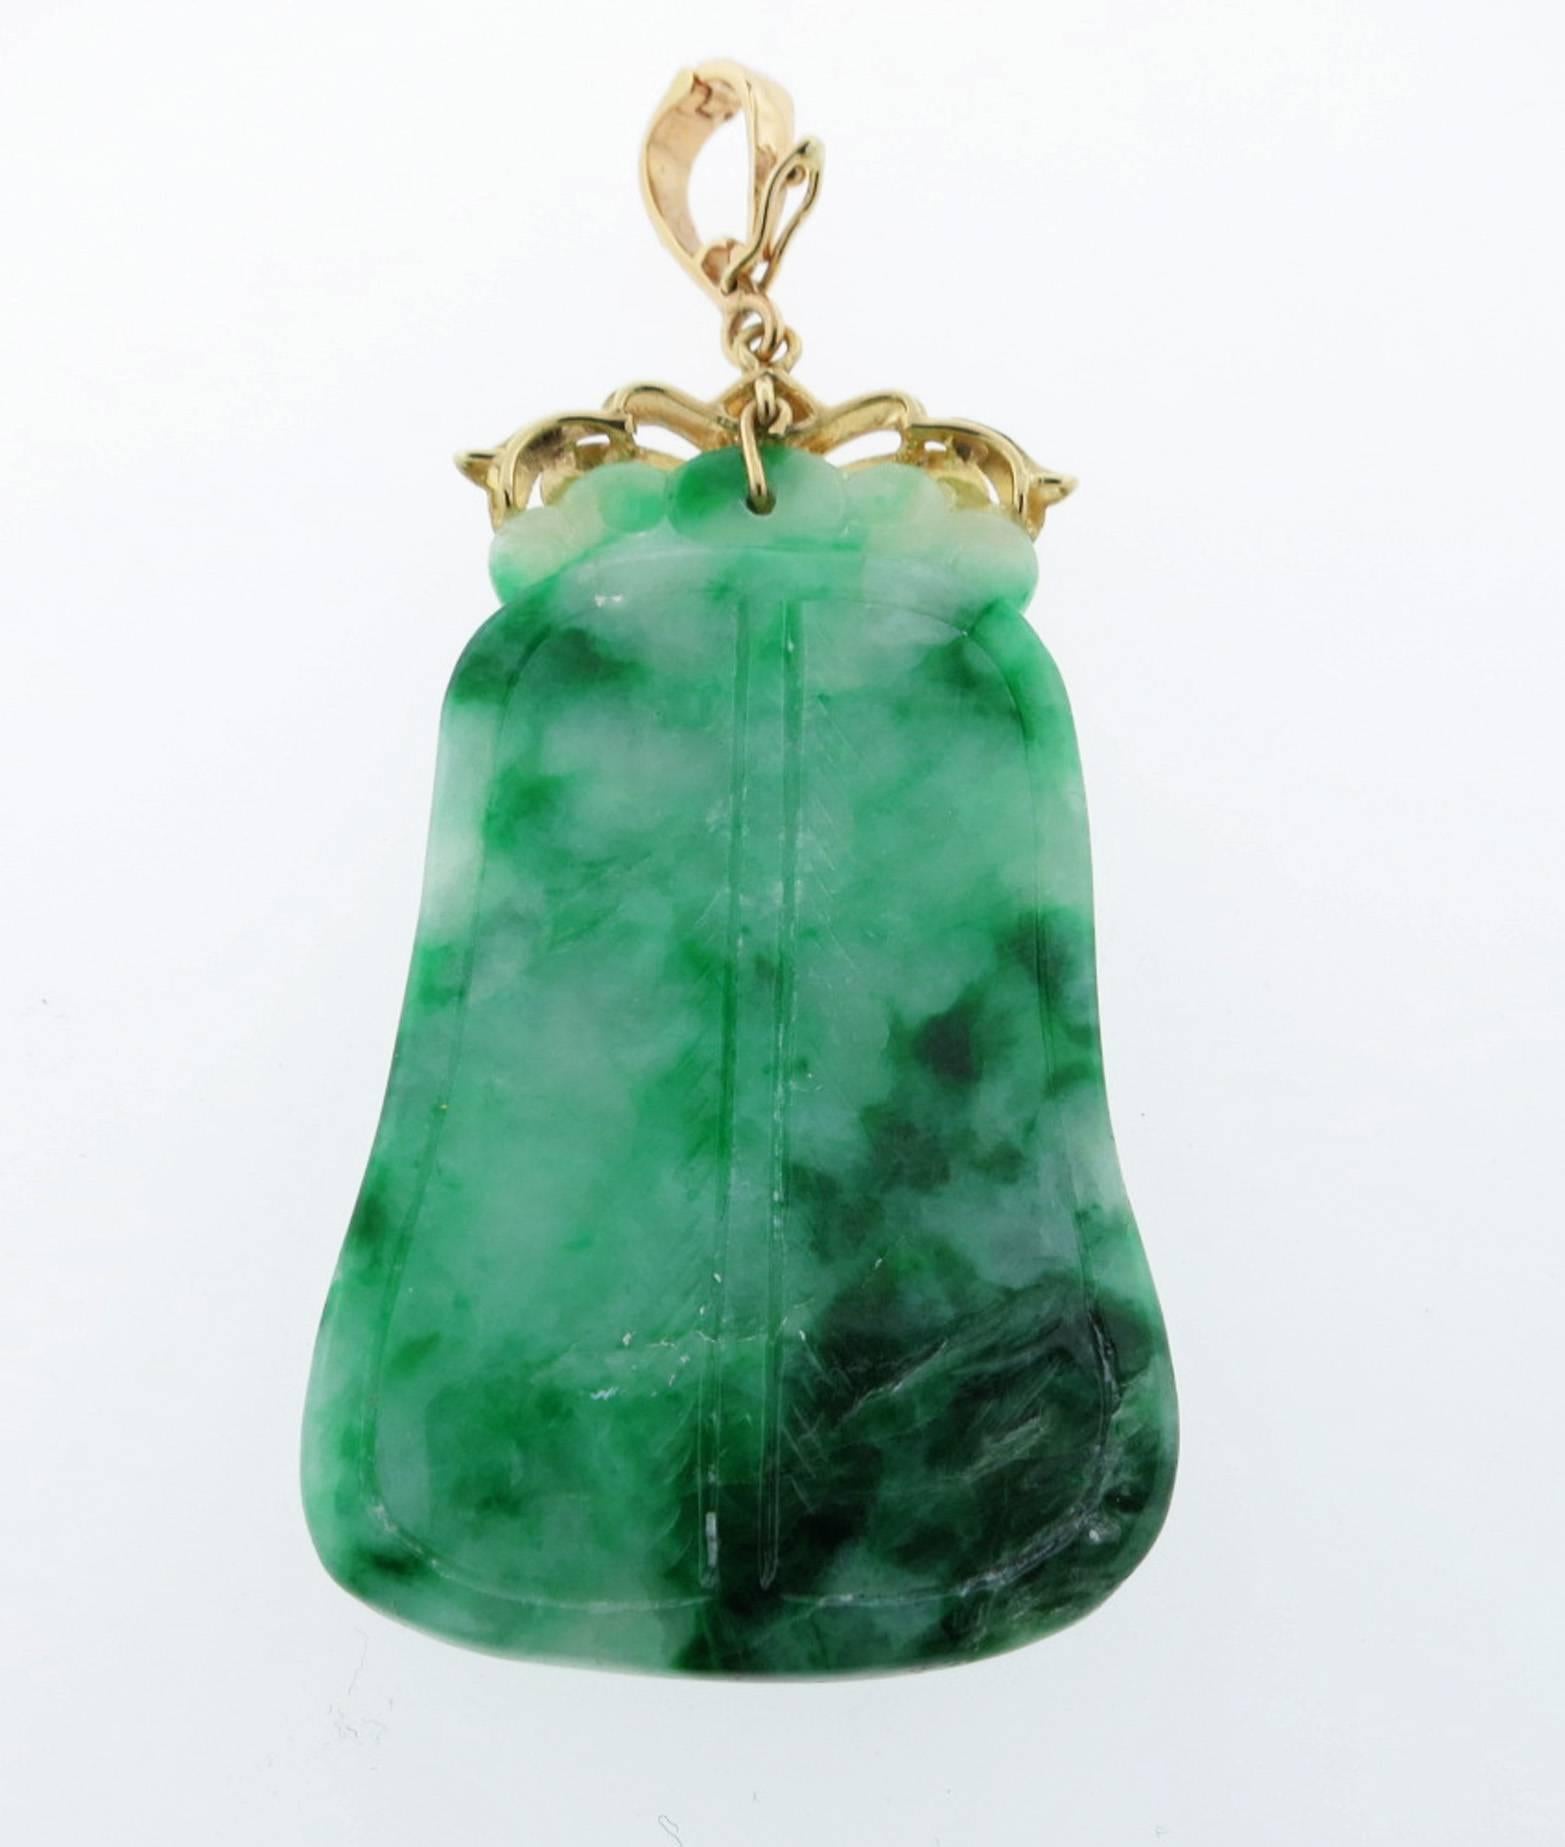 14kt. yellow gold carved jade pendant enhancer measuring 2 inches in length. The enhancer top allows it to be worn with various chain thickness or pearls.